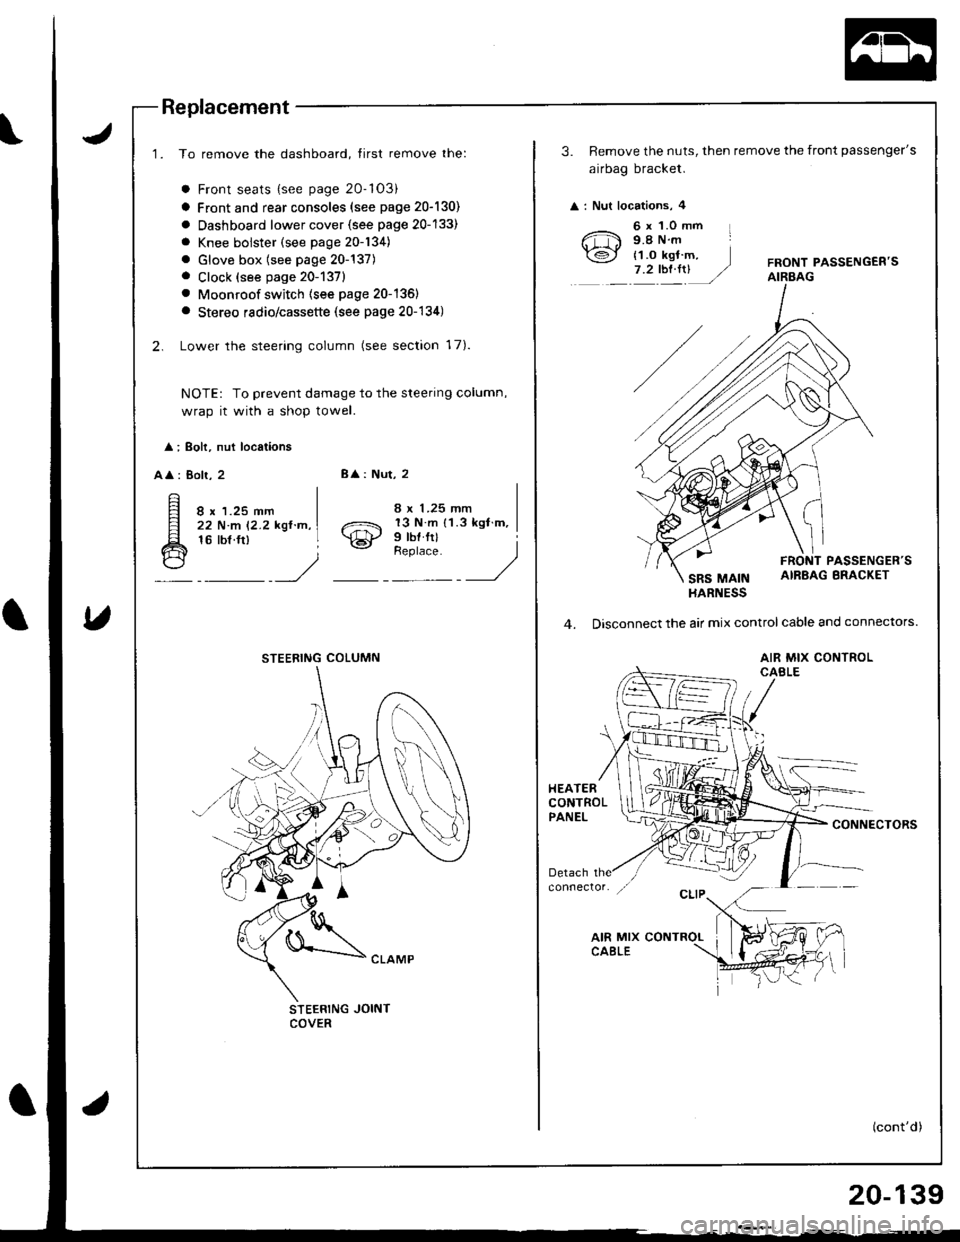 HONDA INTEGRA 1998 4.G Workshop Manual Replacement
1. To remove the dashboard, tirst remove the:
a Front seats {see page 20-103)
a Front and rear consoles (see page 20-130)
a Oashboard lower cover {see page 20-133)
a Knee bolster (see pag